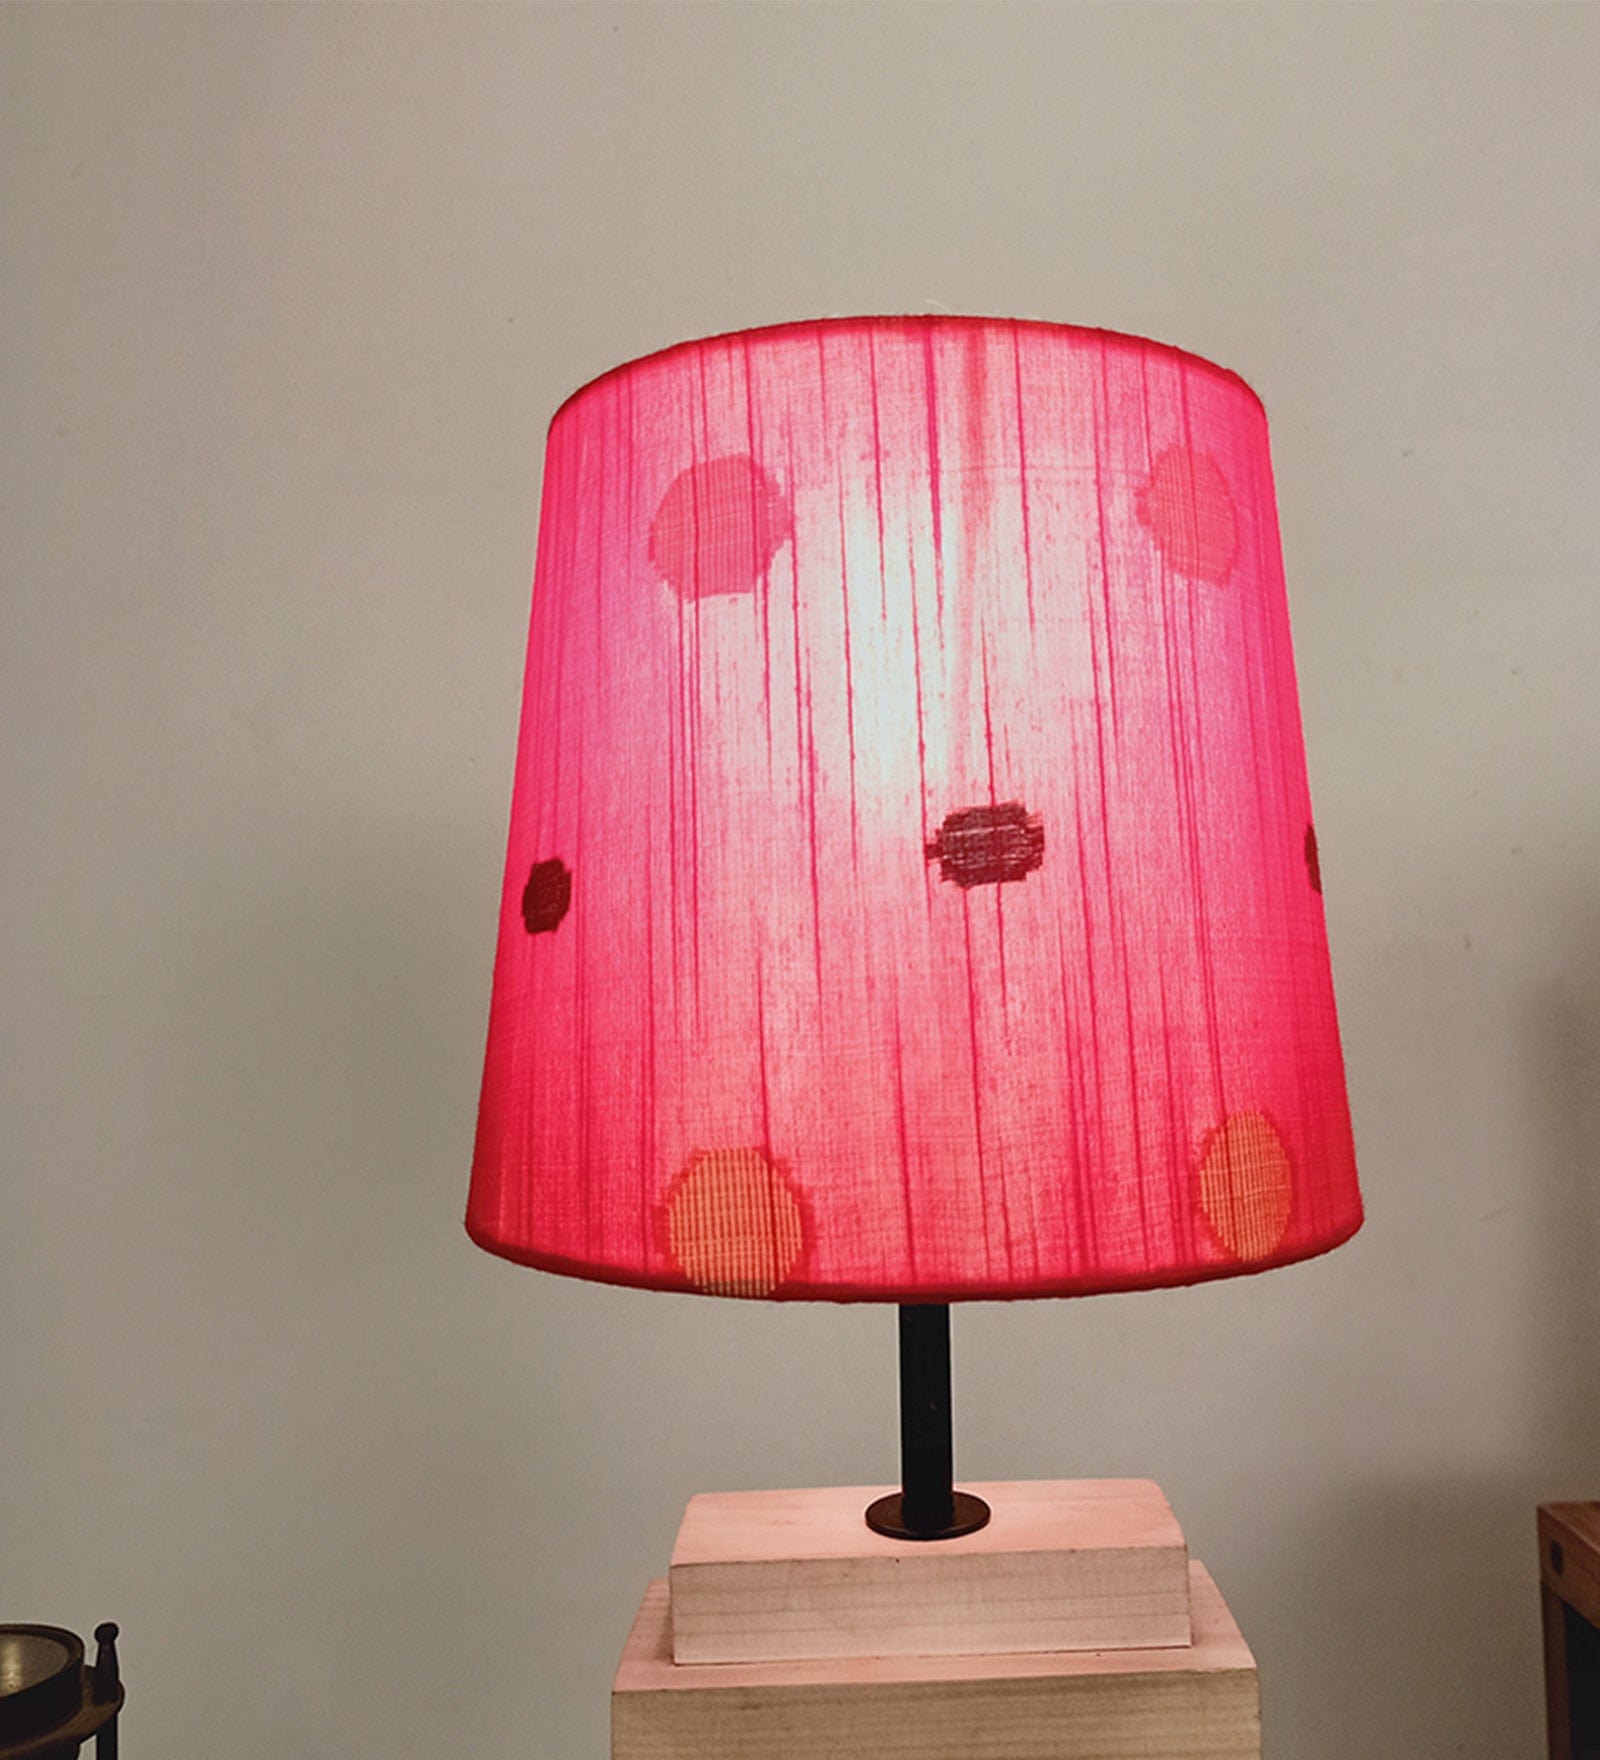 Truffle Brown Wooden Table Lamp with Yellow Printed Fabric Lampshade (BULB NOT INCLUDED)